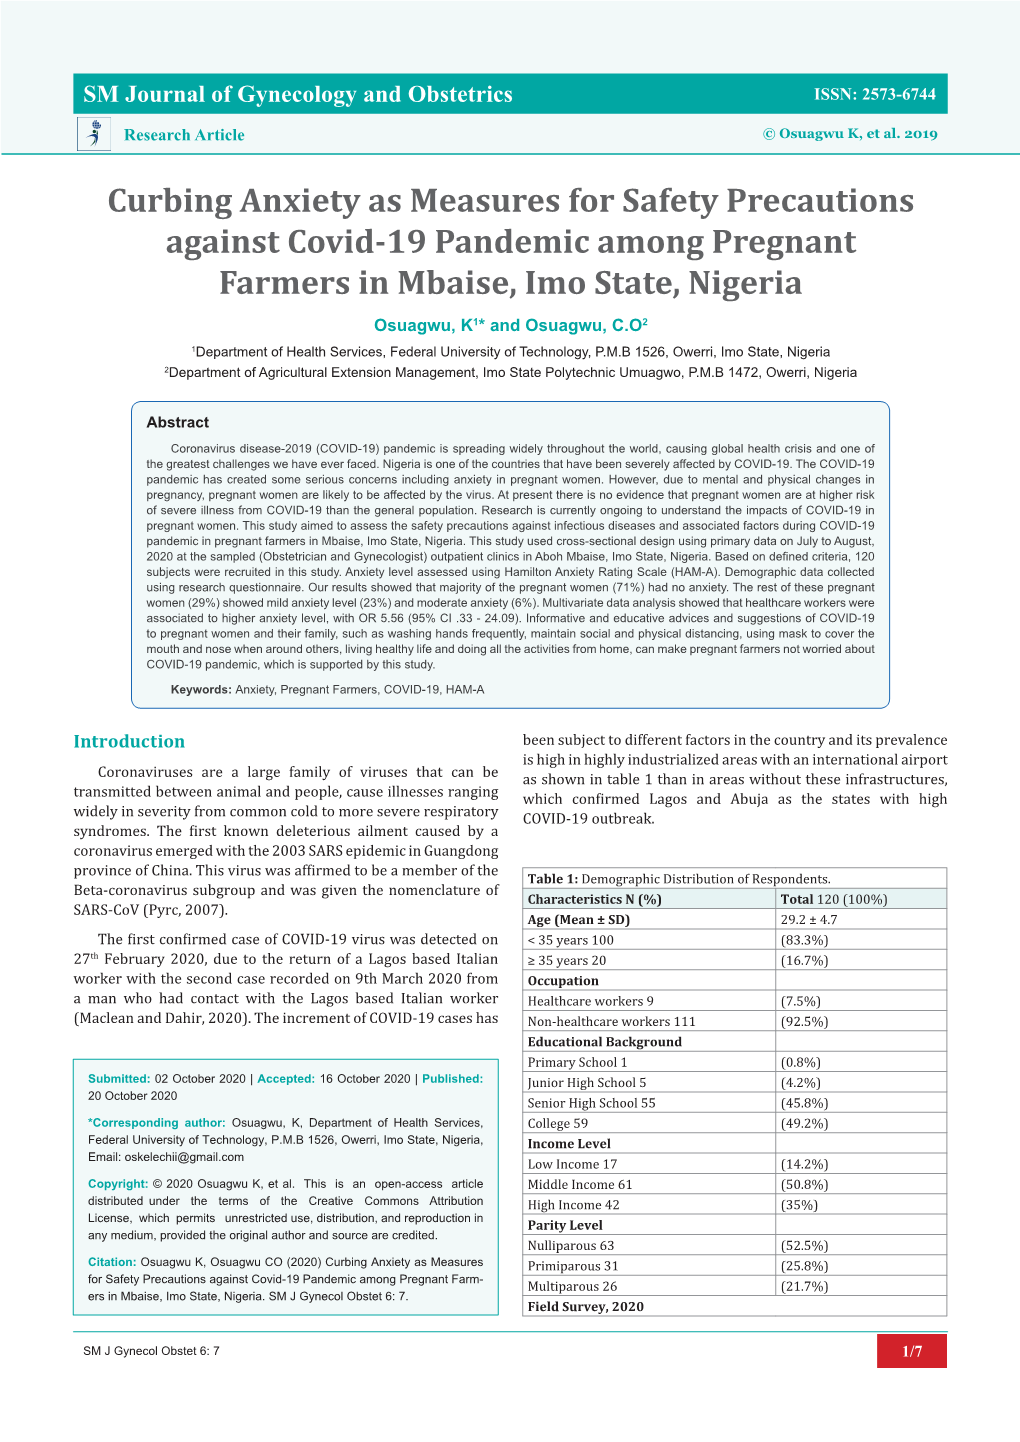 Curbing Anxiety As Measures for Safety Precautions Against Covid-19 Pandemic Among Pregnant Farmers in Mbaise, Imo State, Nigeri